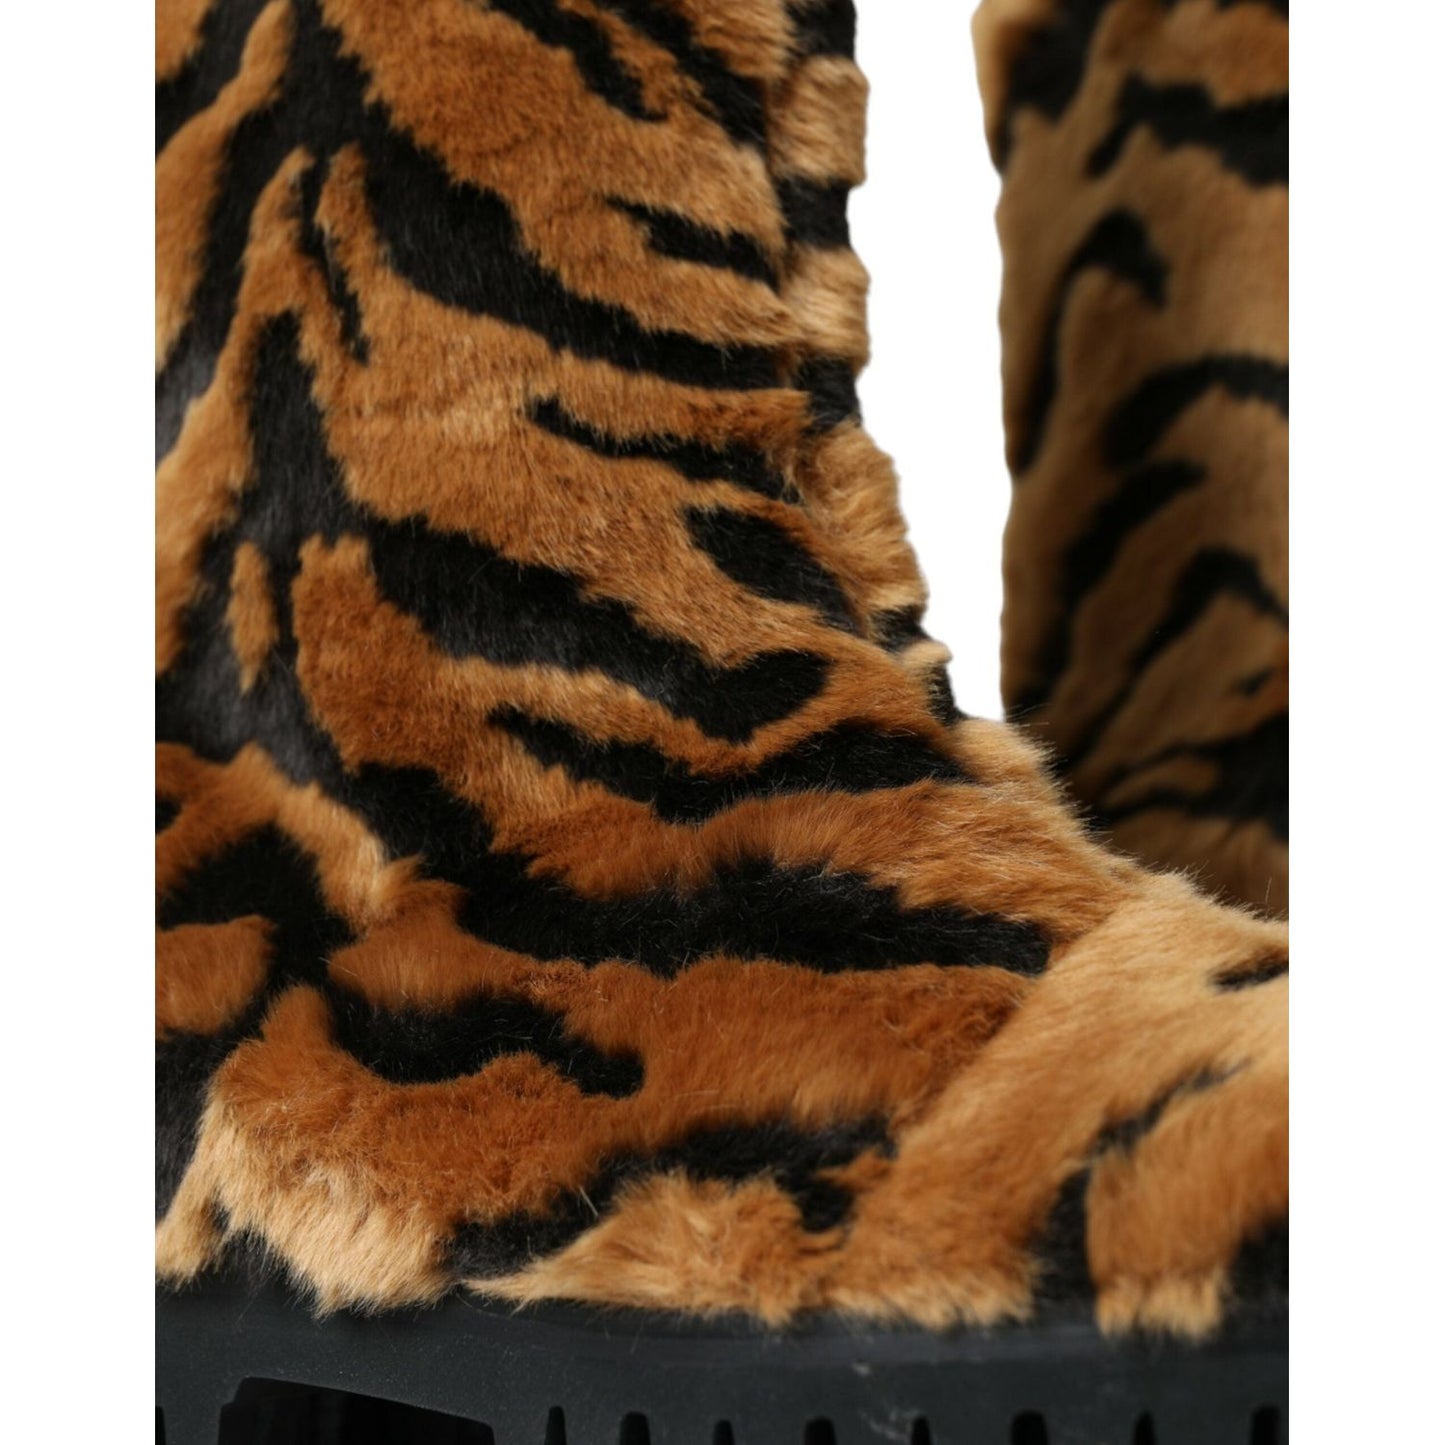 Dolce & Gabbana Brown Tiger Fur Leather Mid Calf Boots Shoes brown-tiger-fur-leather-mid-calf-boots-shoes